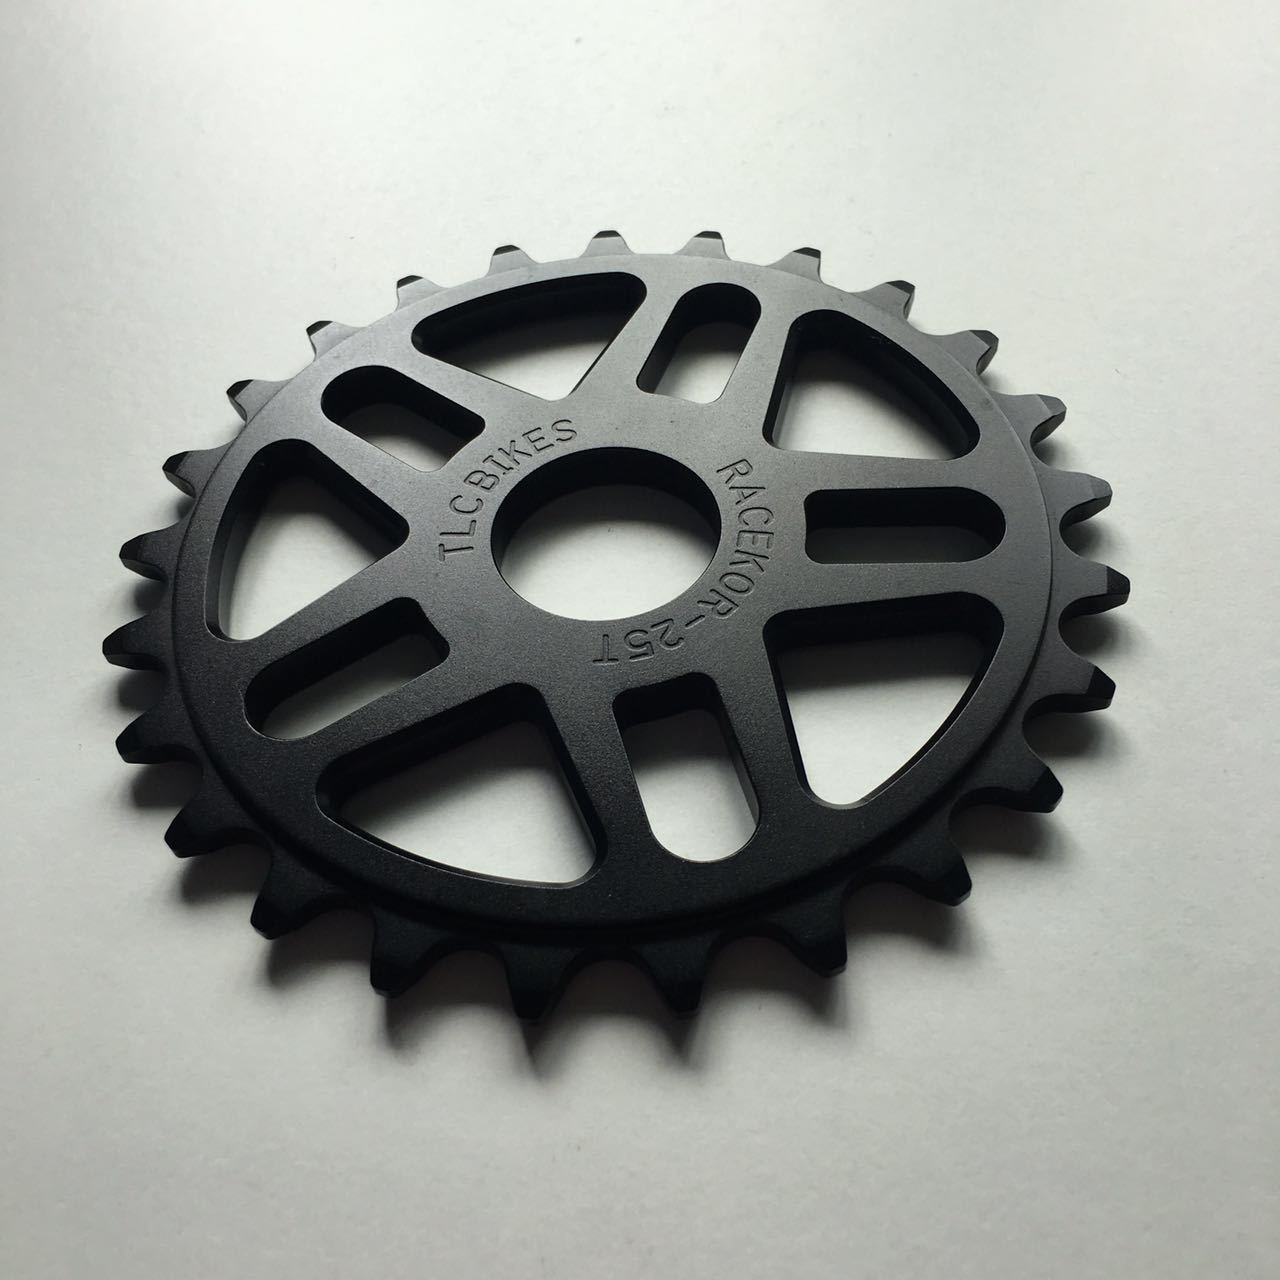 black anodized aluminum wheels and pulley wheels for bike